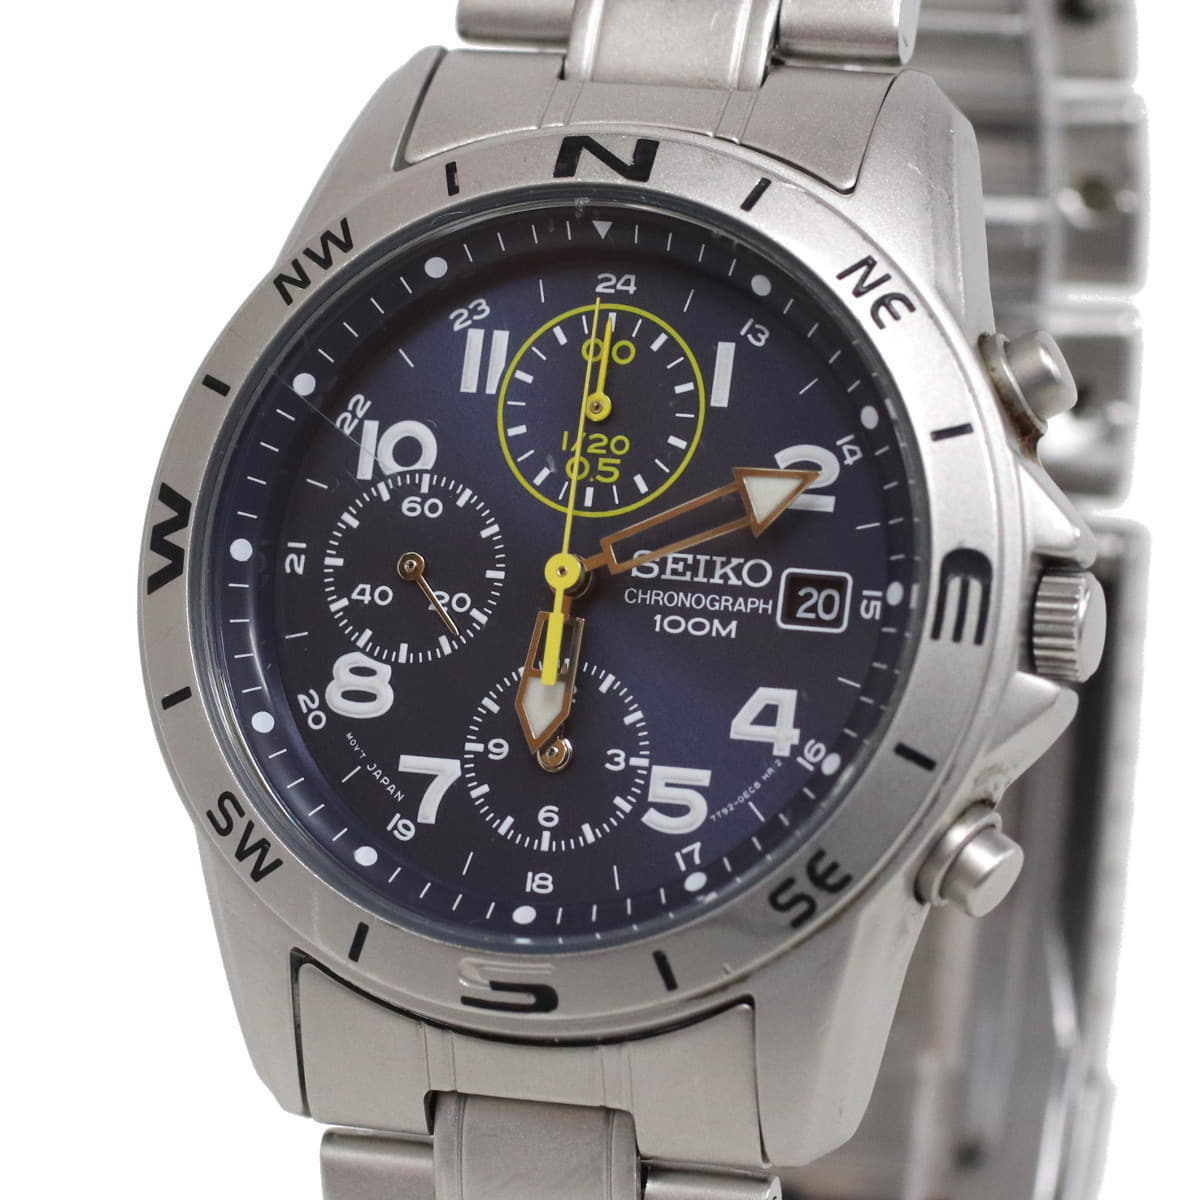 Used]SEIKO Men's Chronograph Watch 7T92-0DX0 - BE FORWARD Store